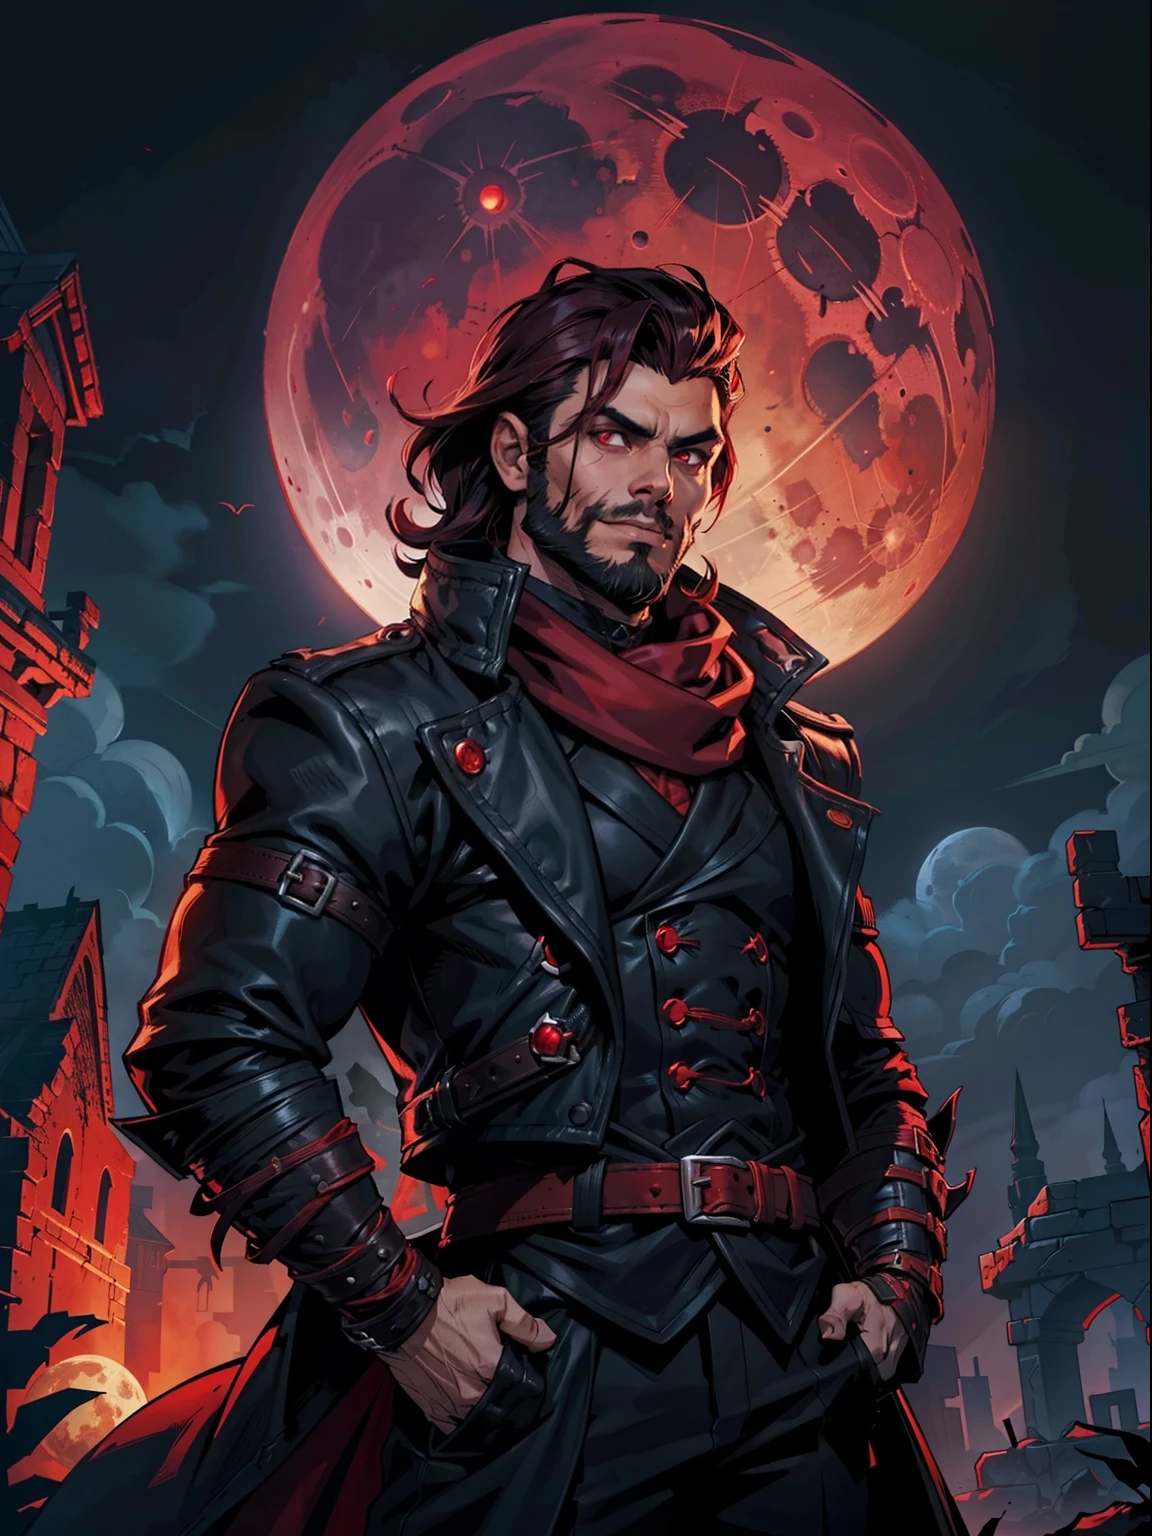 Dark night blood moon background, Darkest dungeon style, looking at the moon, game portrait, Sadurang from Marvel, hunk, short mane hair, mullet, defined face, detailed eyes, short beard, glowing red eyes, dark hair, wily smile, badass, dangerous,  wearing classy trench coat and red scarf